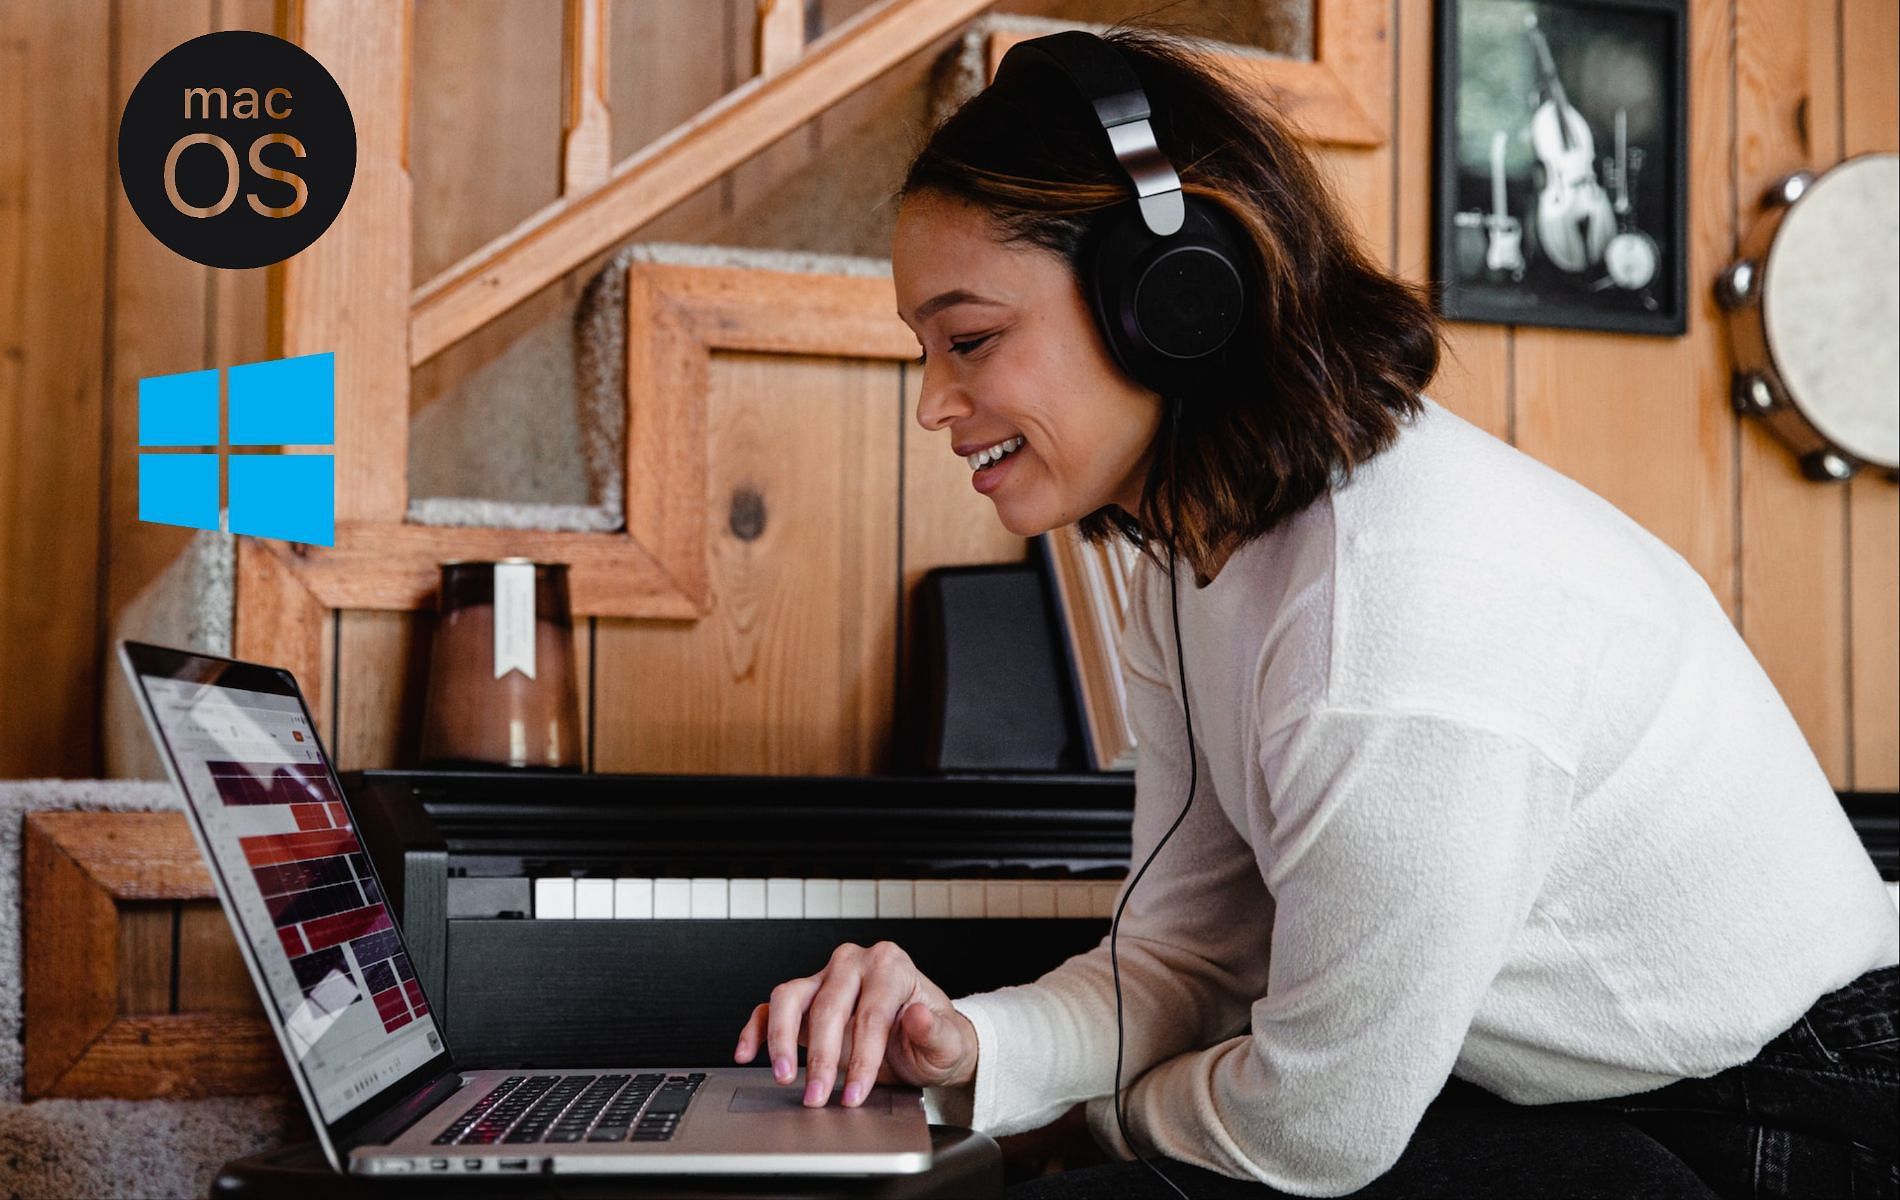 How to boost audio quality on Windows and Mac computers? (Image via Unsplash)